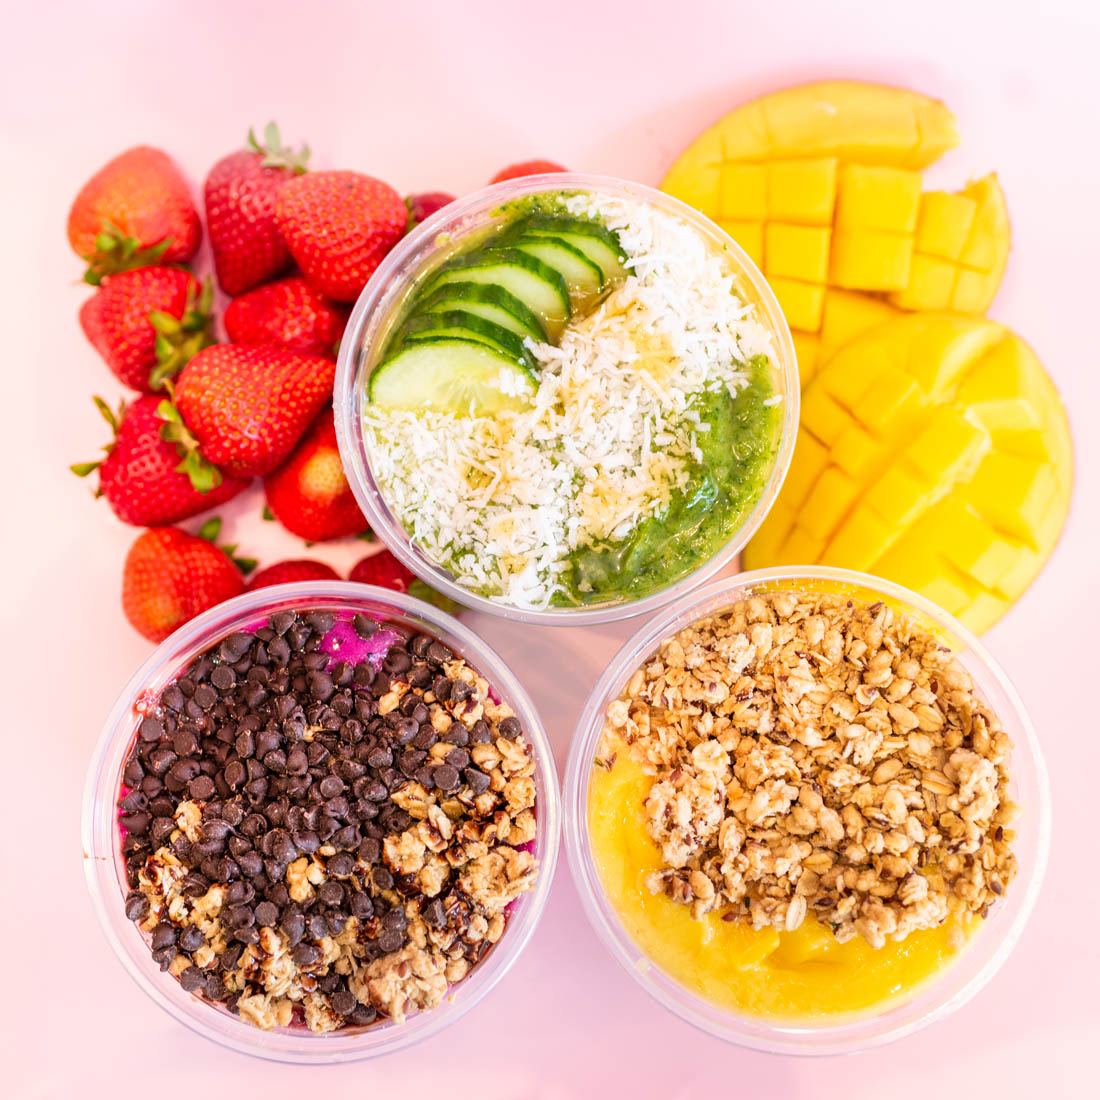 Rush Bowls smoothie bowls nutrition info in Hillsboro.